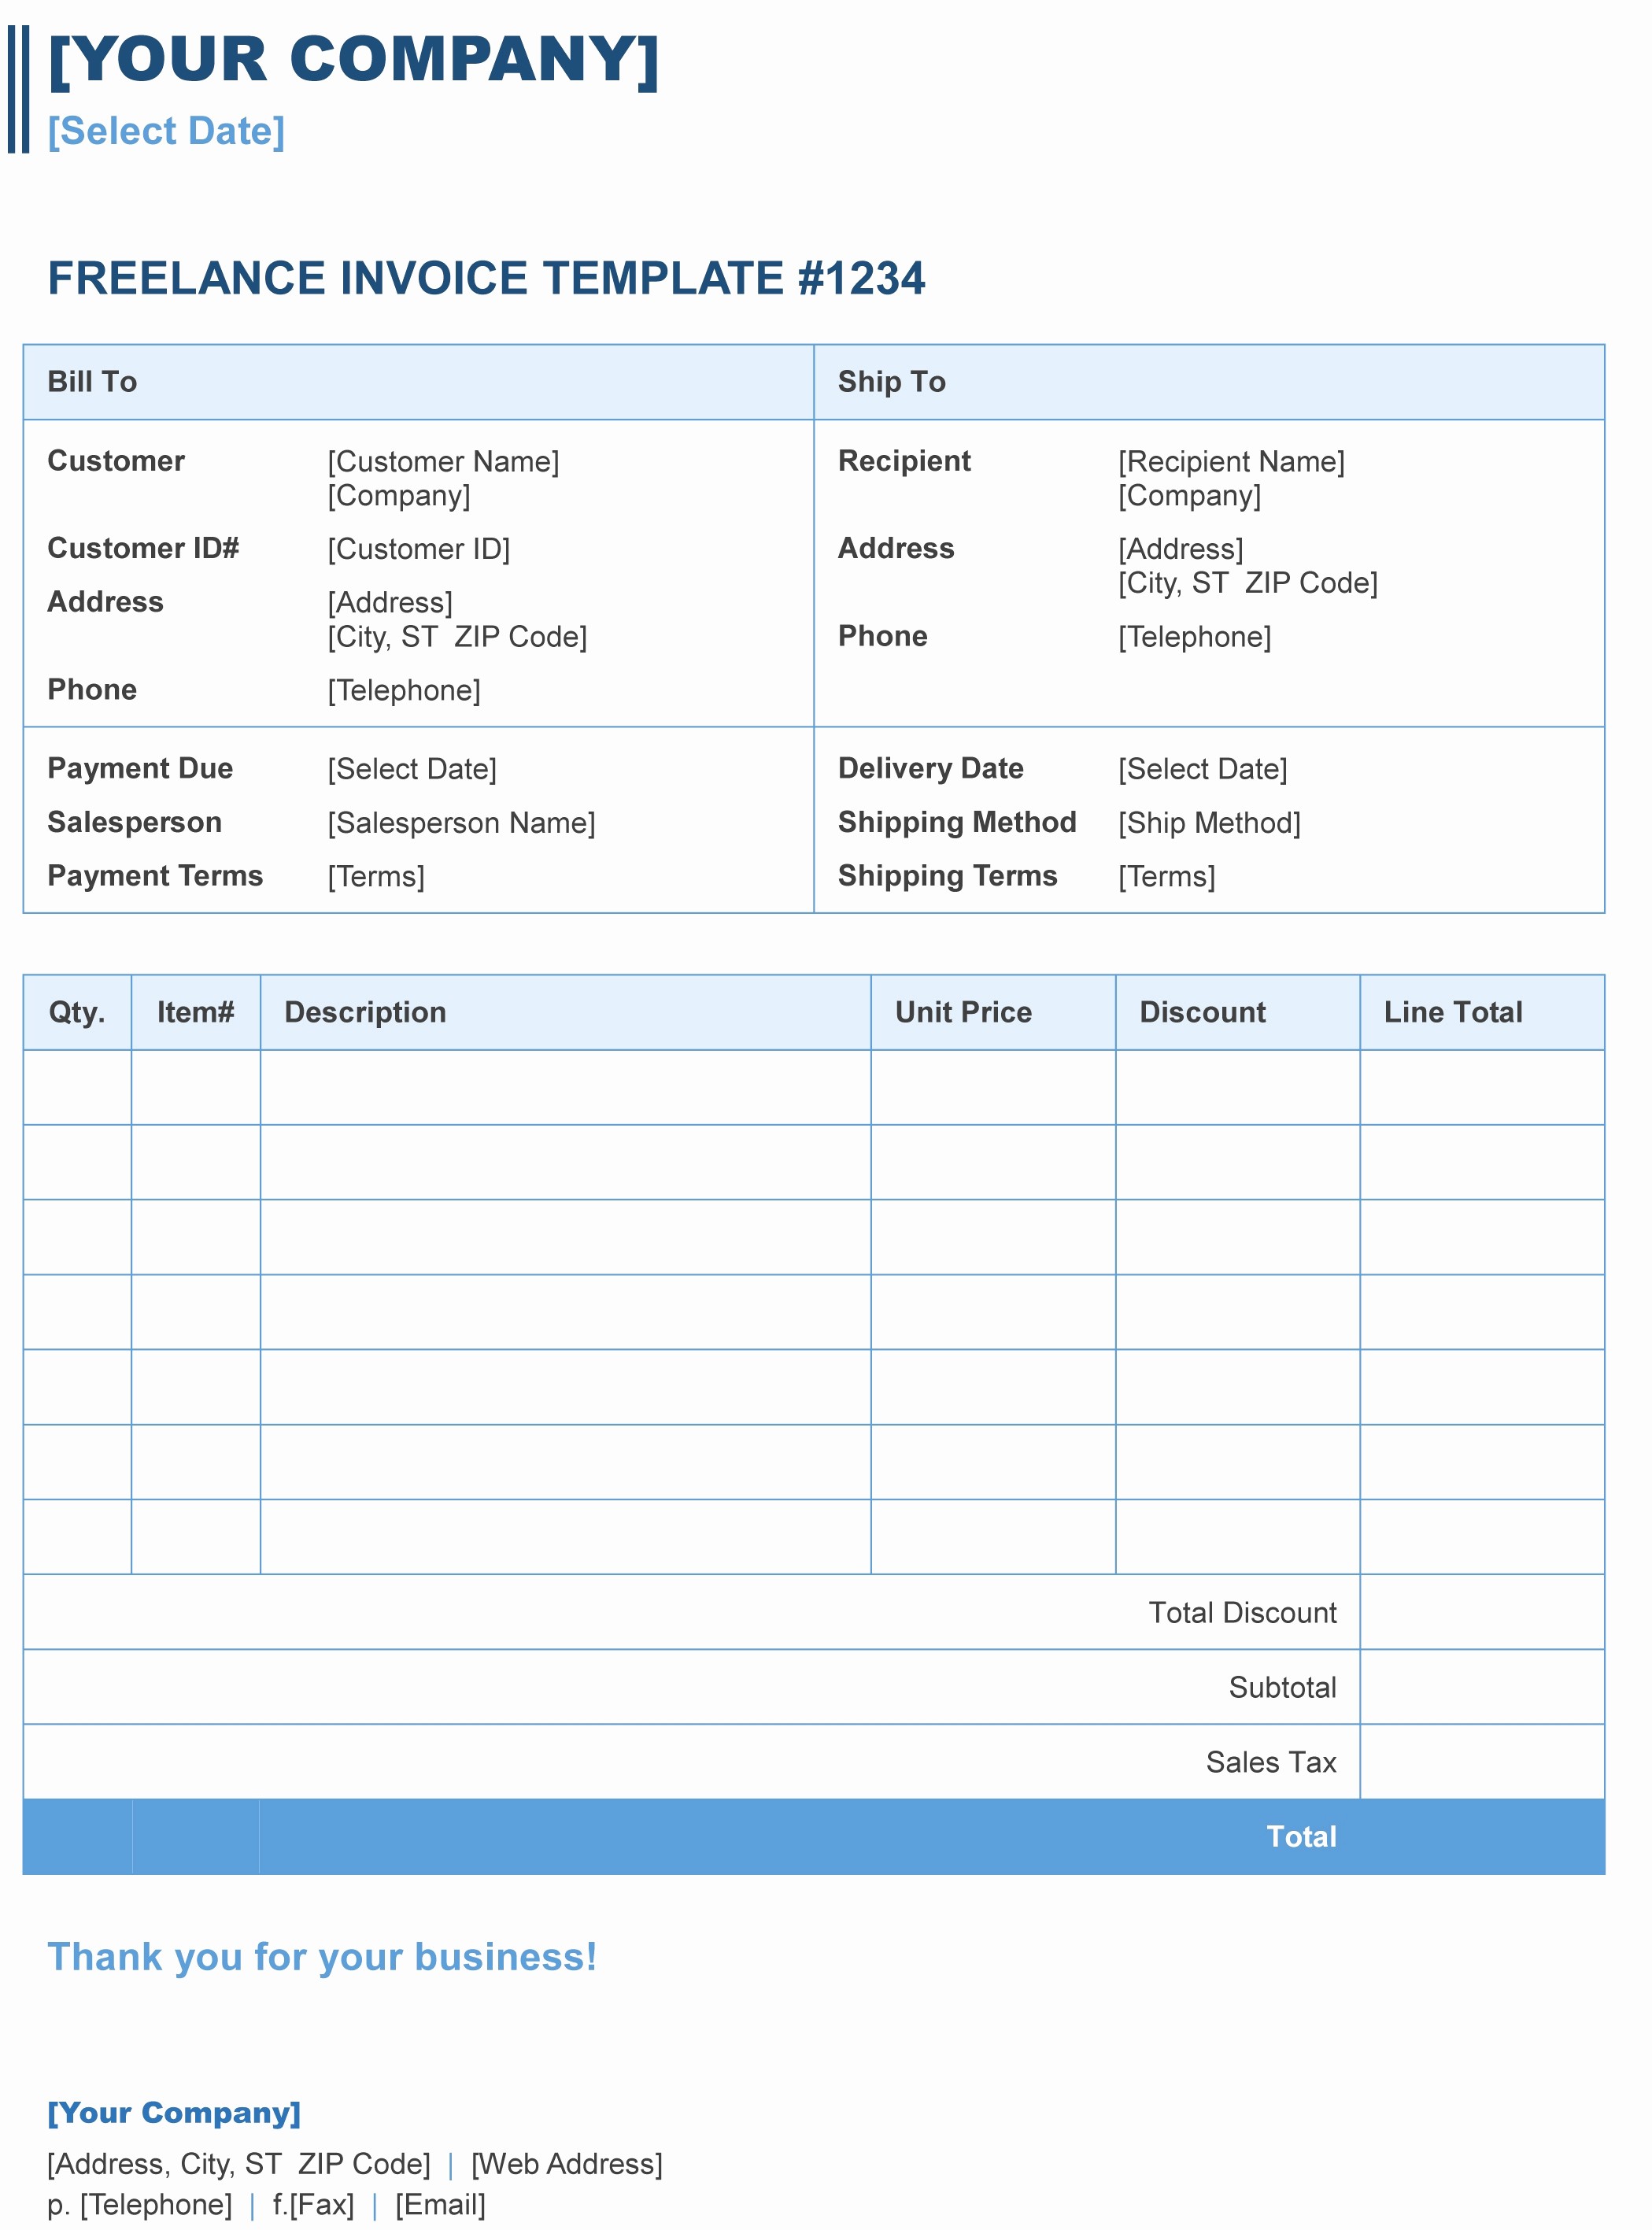 Invoice Template for Microsoft Word Awesome Freelance Invoice Template Excel